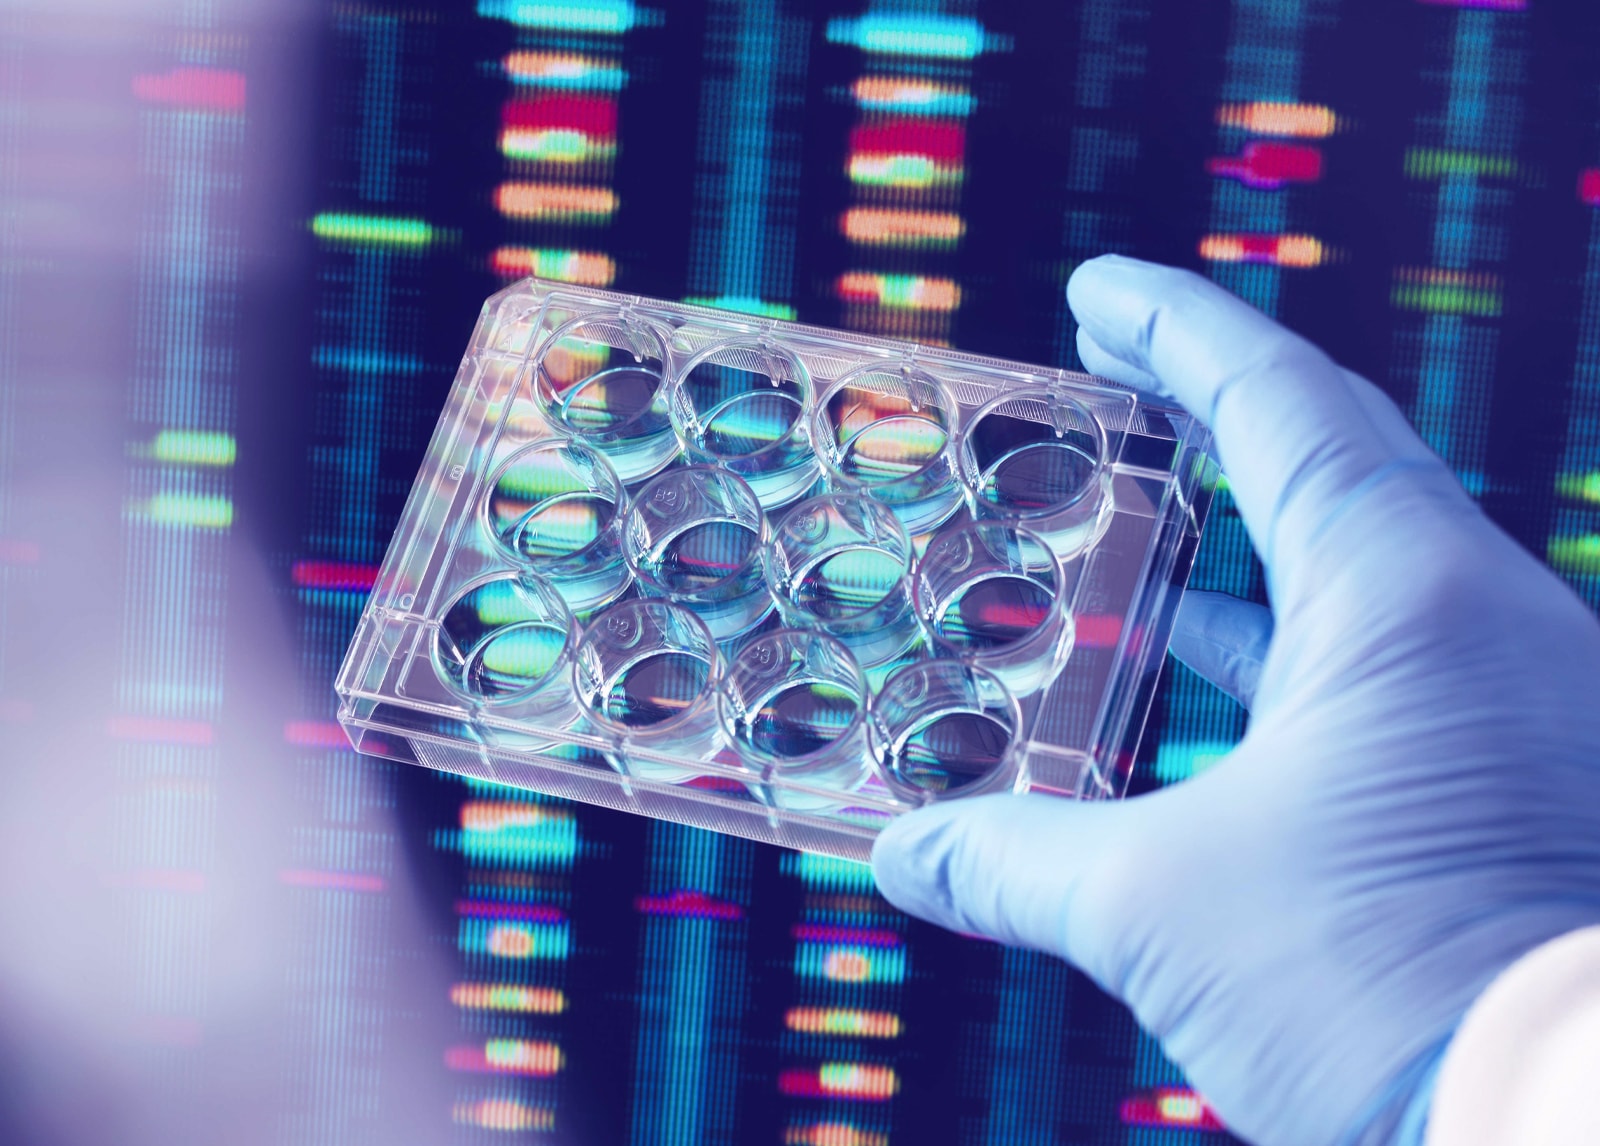 Whole genome sequencing could save NHS millions of pounds, study suggests